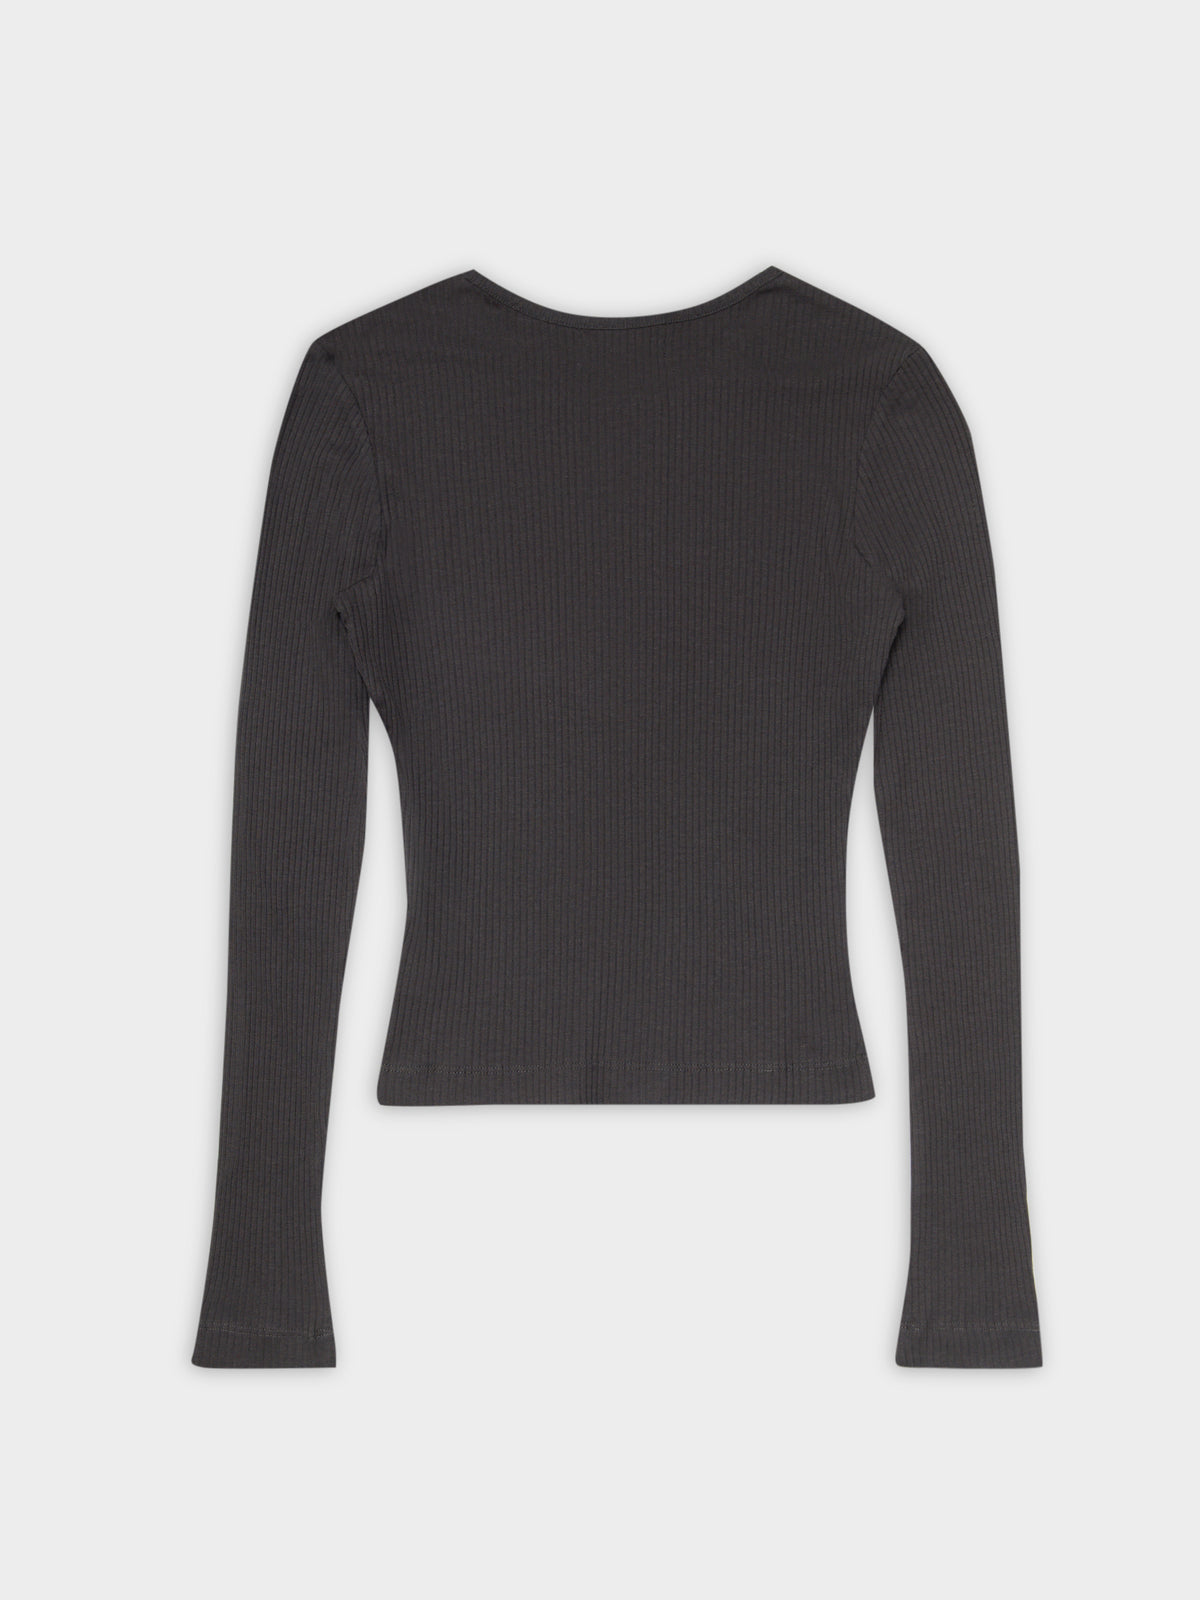 Ribbed Long Sleeve Lounge T-Shirt in Coal